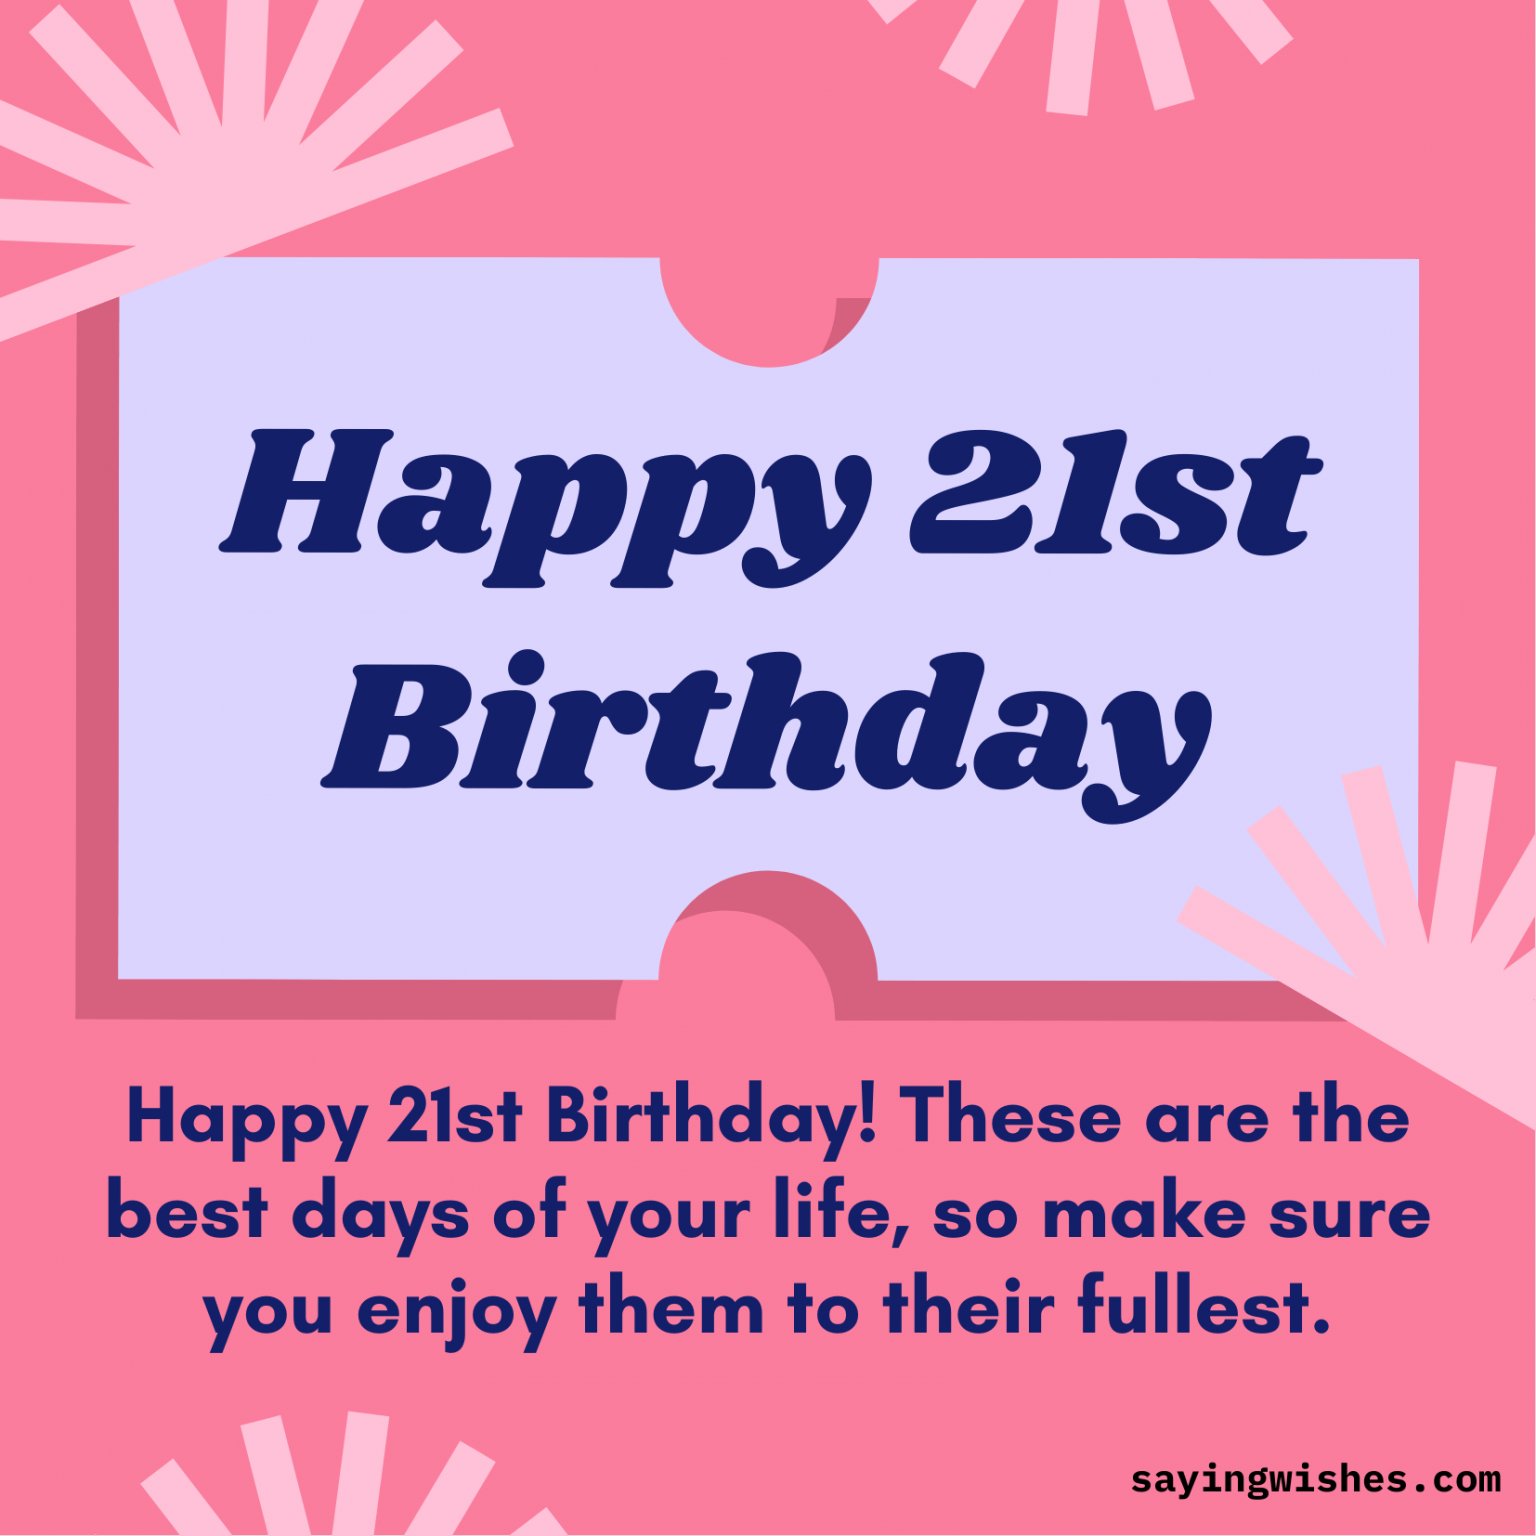 SayingWishes on X: "21st Birthday wishes for Son, Daughter, Best Friend, &amp; others: https://t.co/Hryx4XSEwa #21stbirthday #happybirthday #birthdaywishes #happybirthdayson #daughterlove #bestfriend #bestfriendforever #happybday https://t.co ...